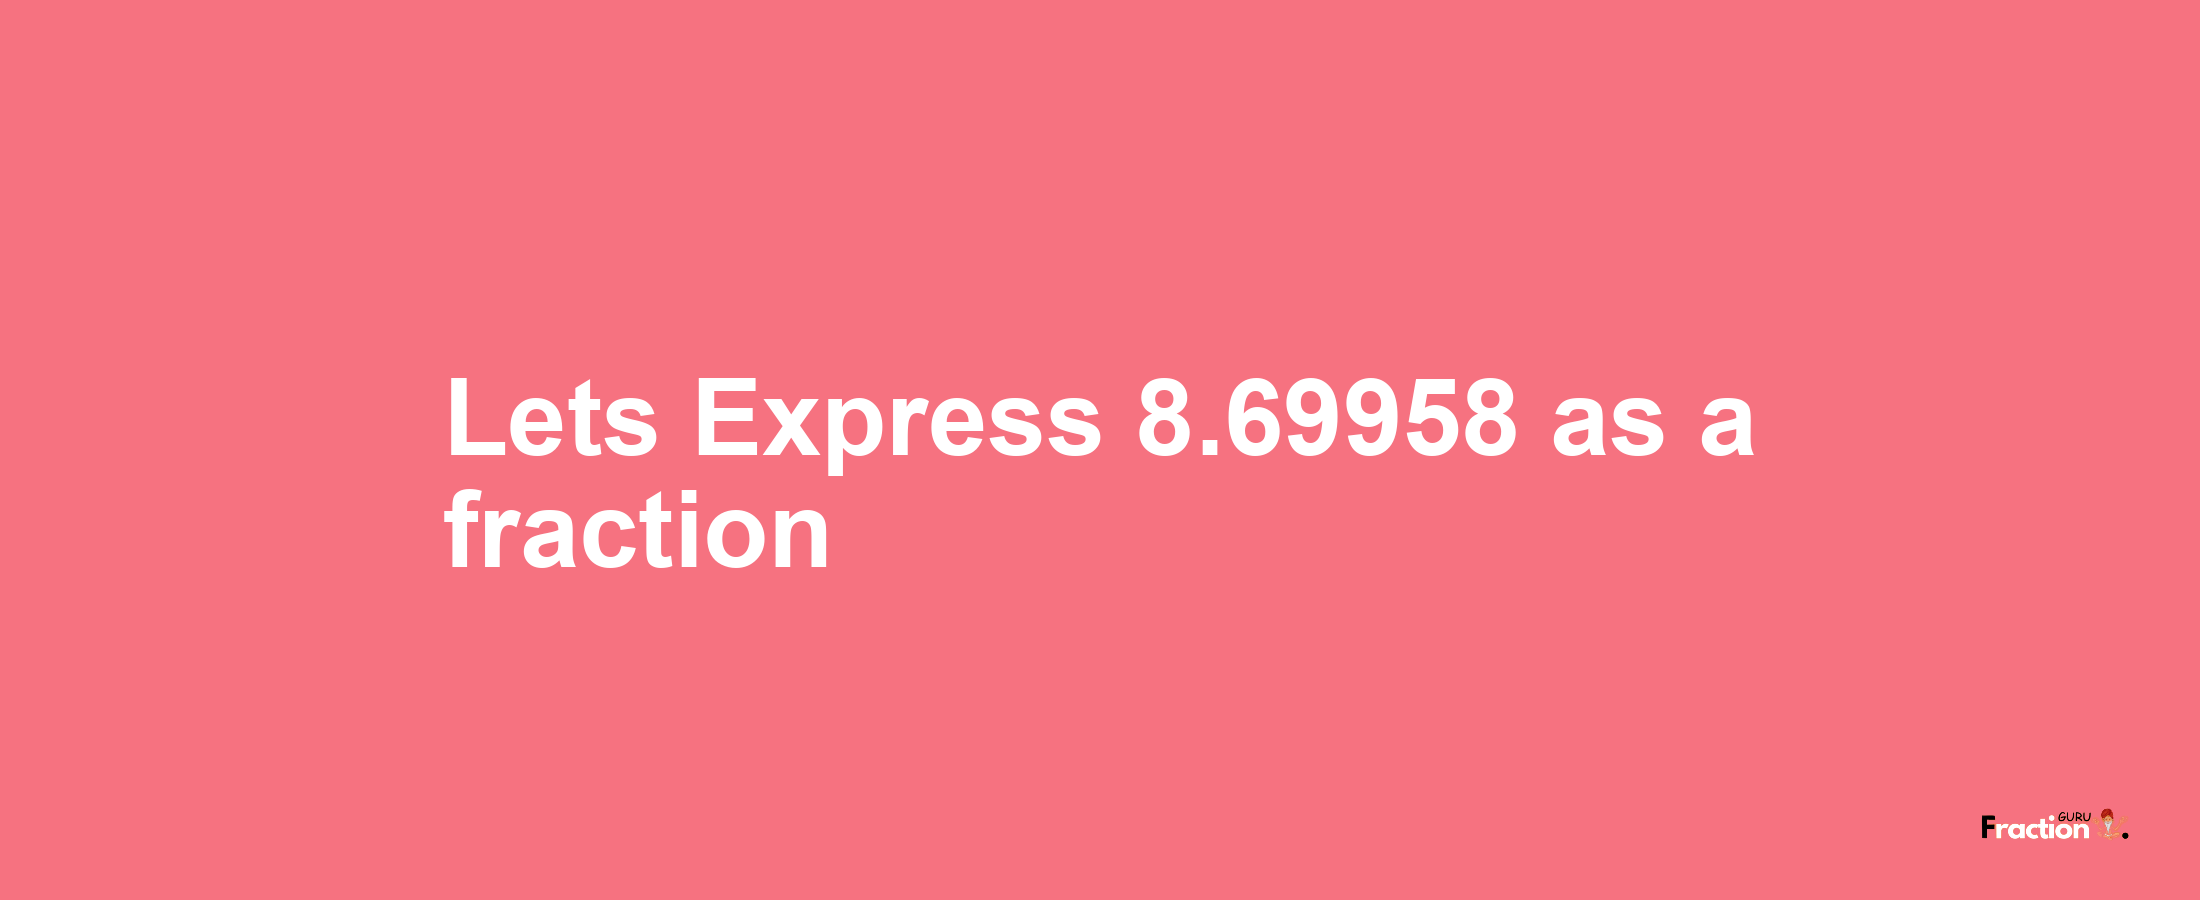 Lets Express 8.69958 as afraction